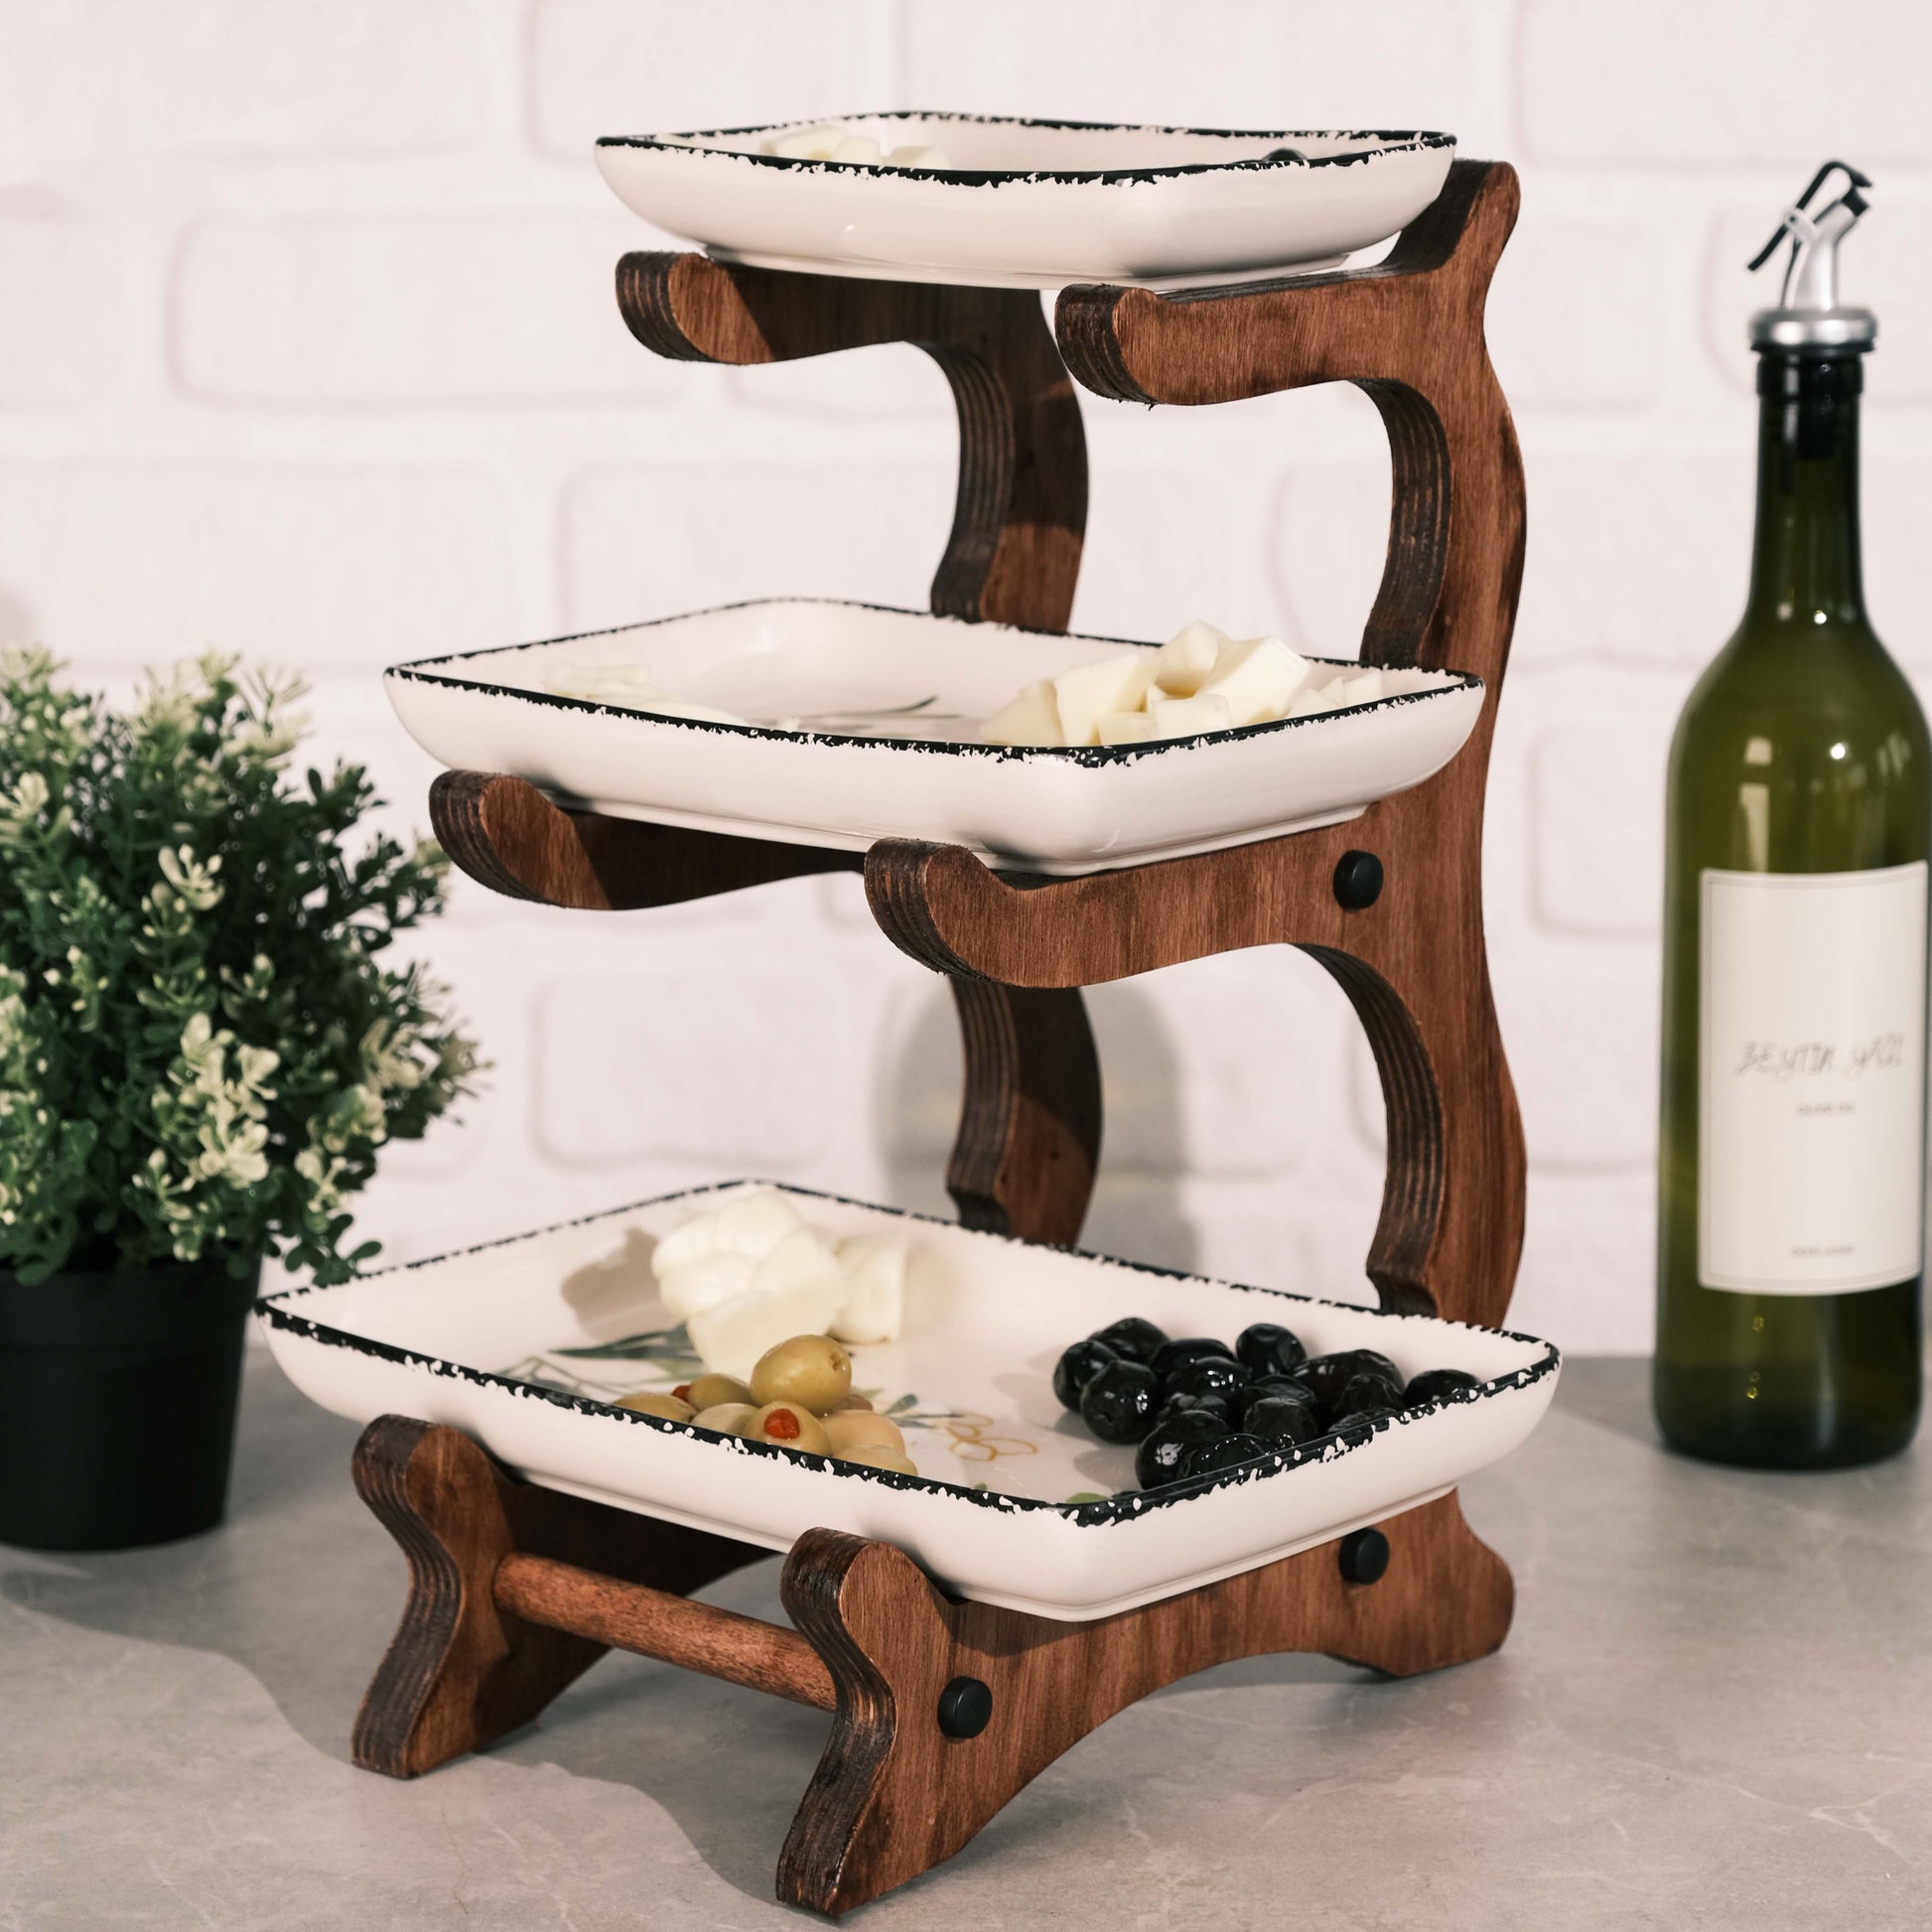 Ceramic Bowl Set with Wooden Rack - 2-3 Tiers Resin Wood Living